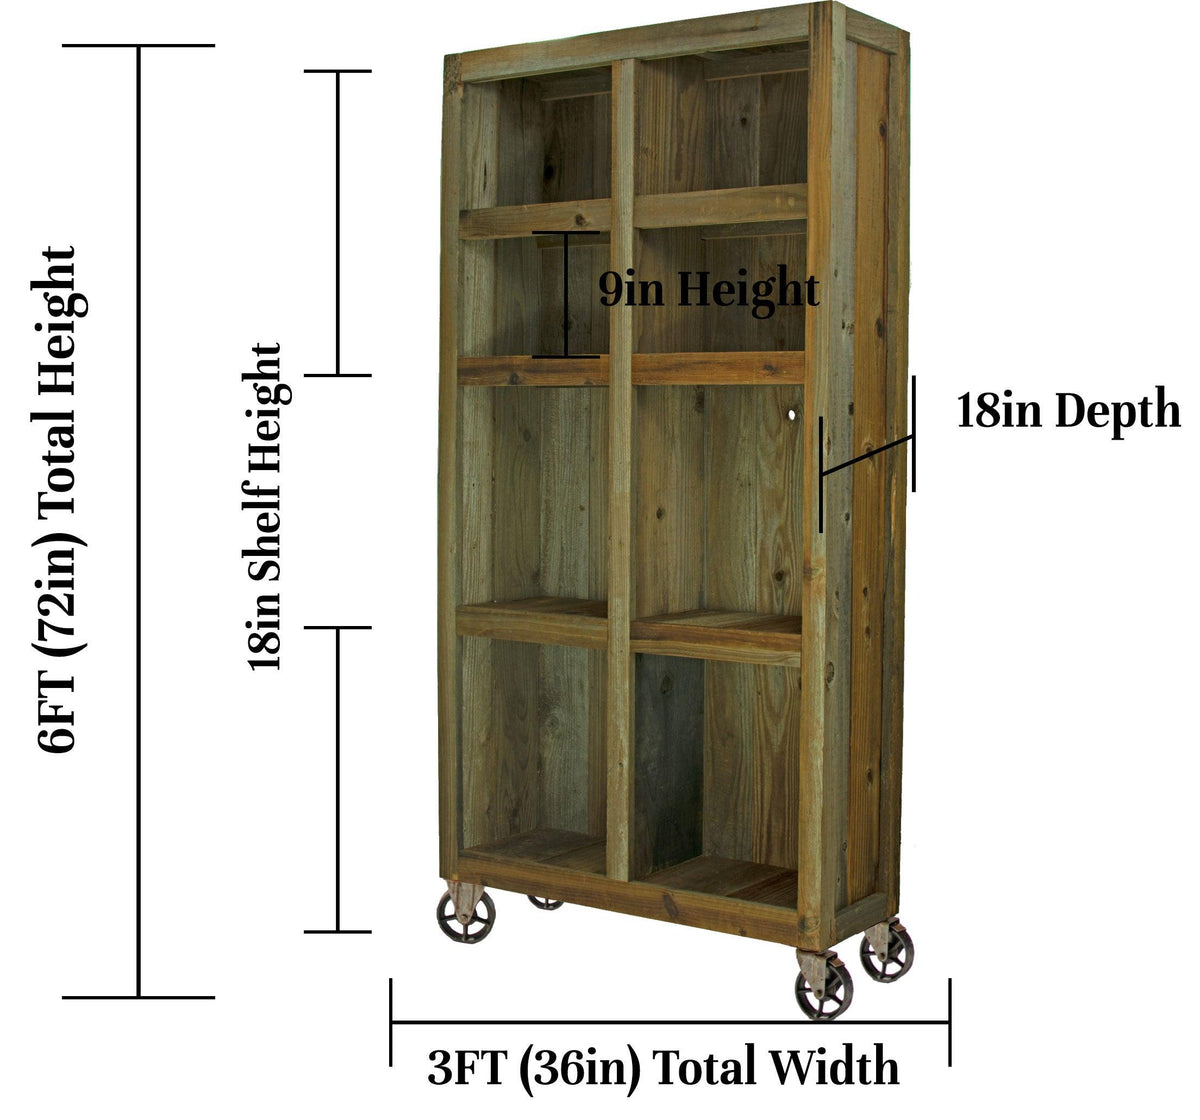 Dimensions of Lee Display's brand new Outdoor Rolling Redwood Storage Cabinet with Wheels. Shelving Unit with 5in Vintage Cast Iron Casters on sale at leedisplay.com